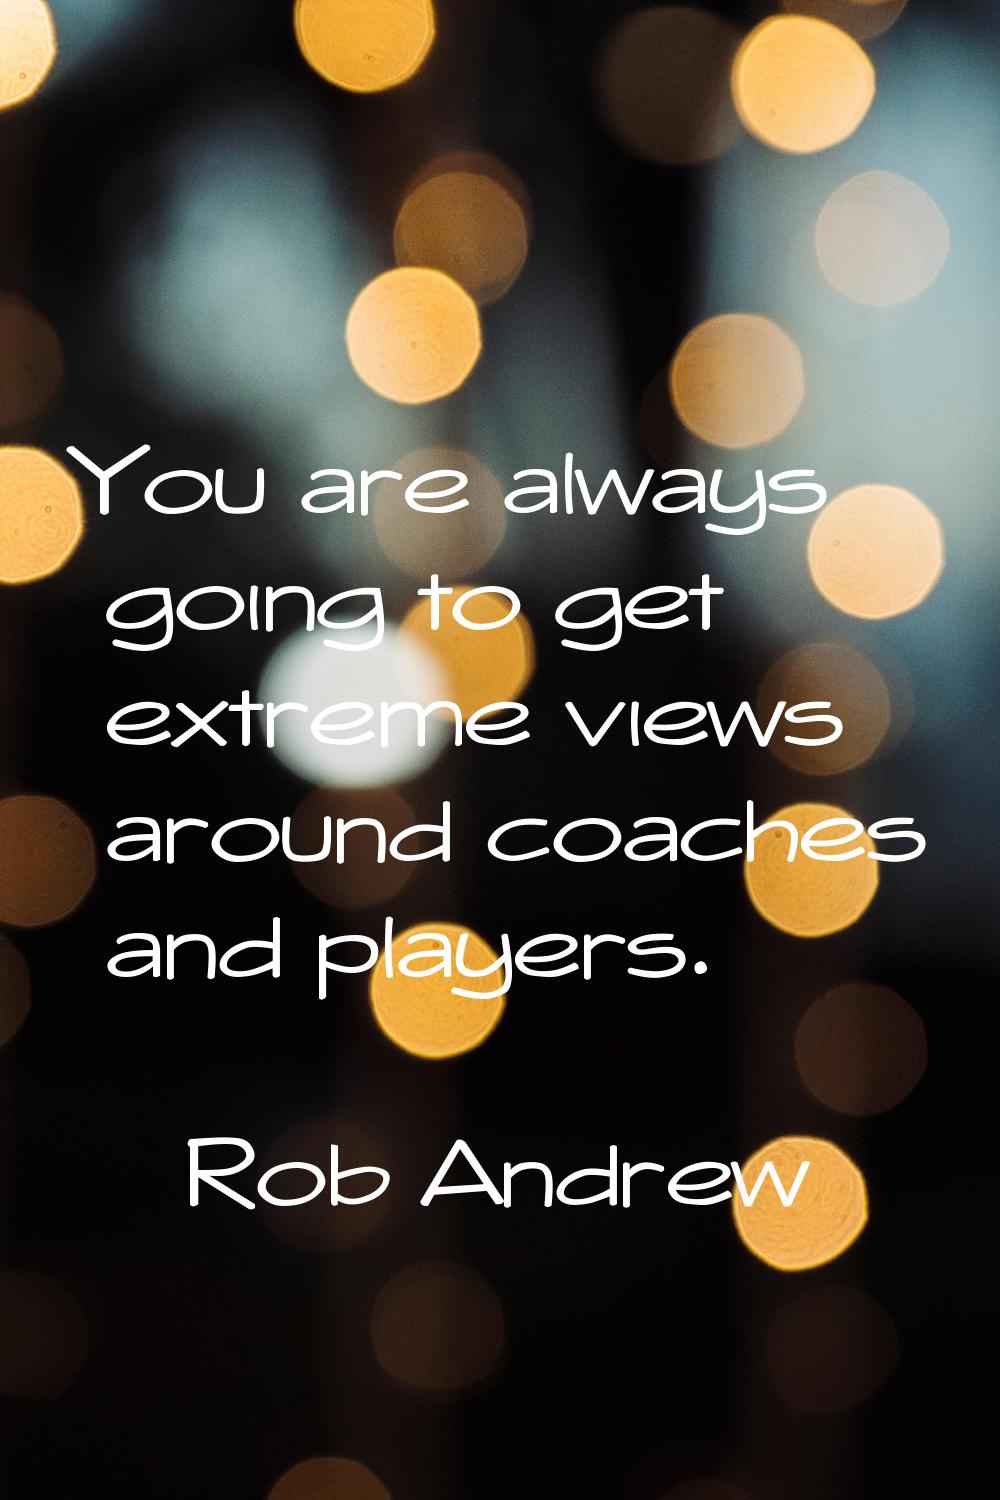 You are always going to get extreme views around coaches and players.